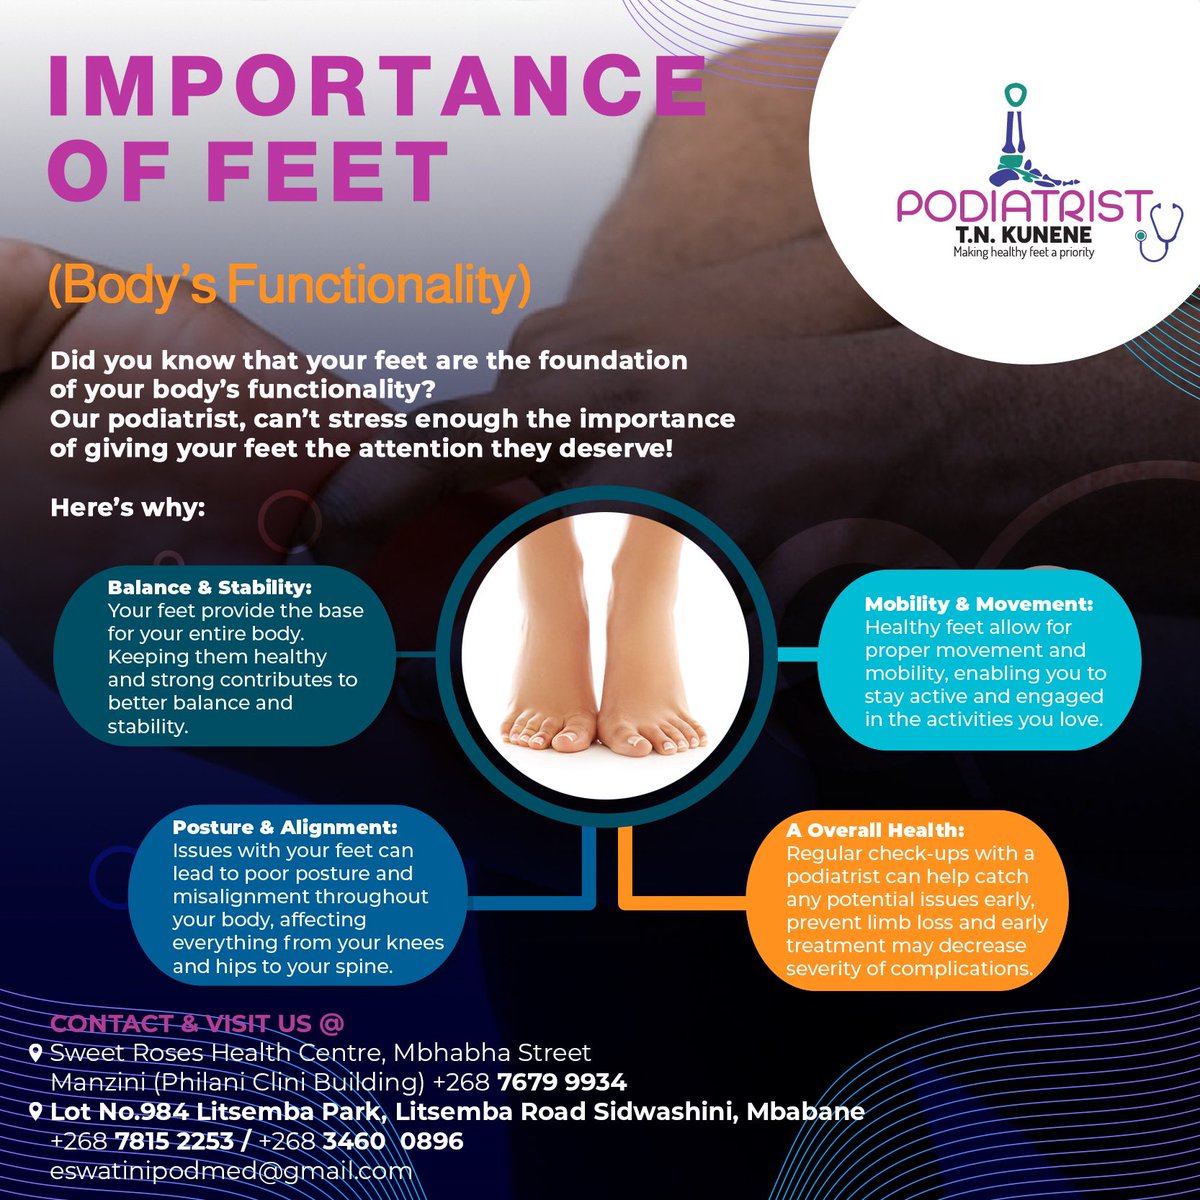 Taking care of your feet isn’t just about comfort-it’s about maintaining the foundation of your body’s functionality. So let’s show some love to our feet! It may improve your overall health status and quality of life #FootHealth #PodiatryPerspective #HealthyFeet